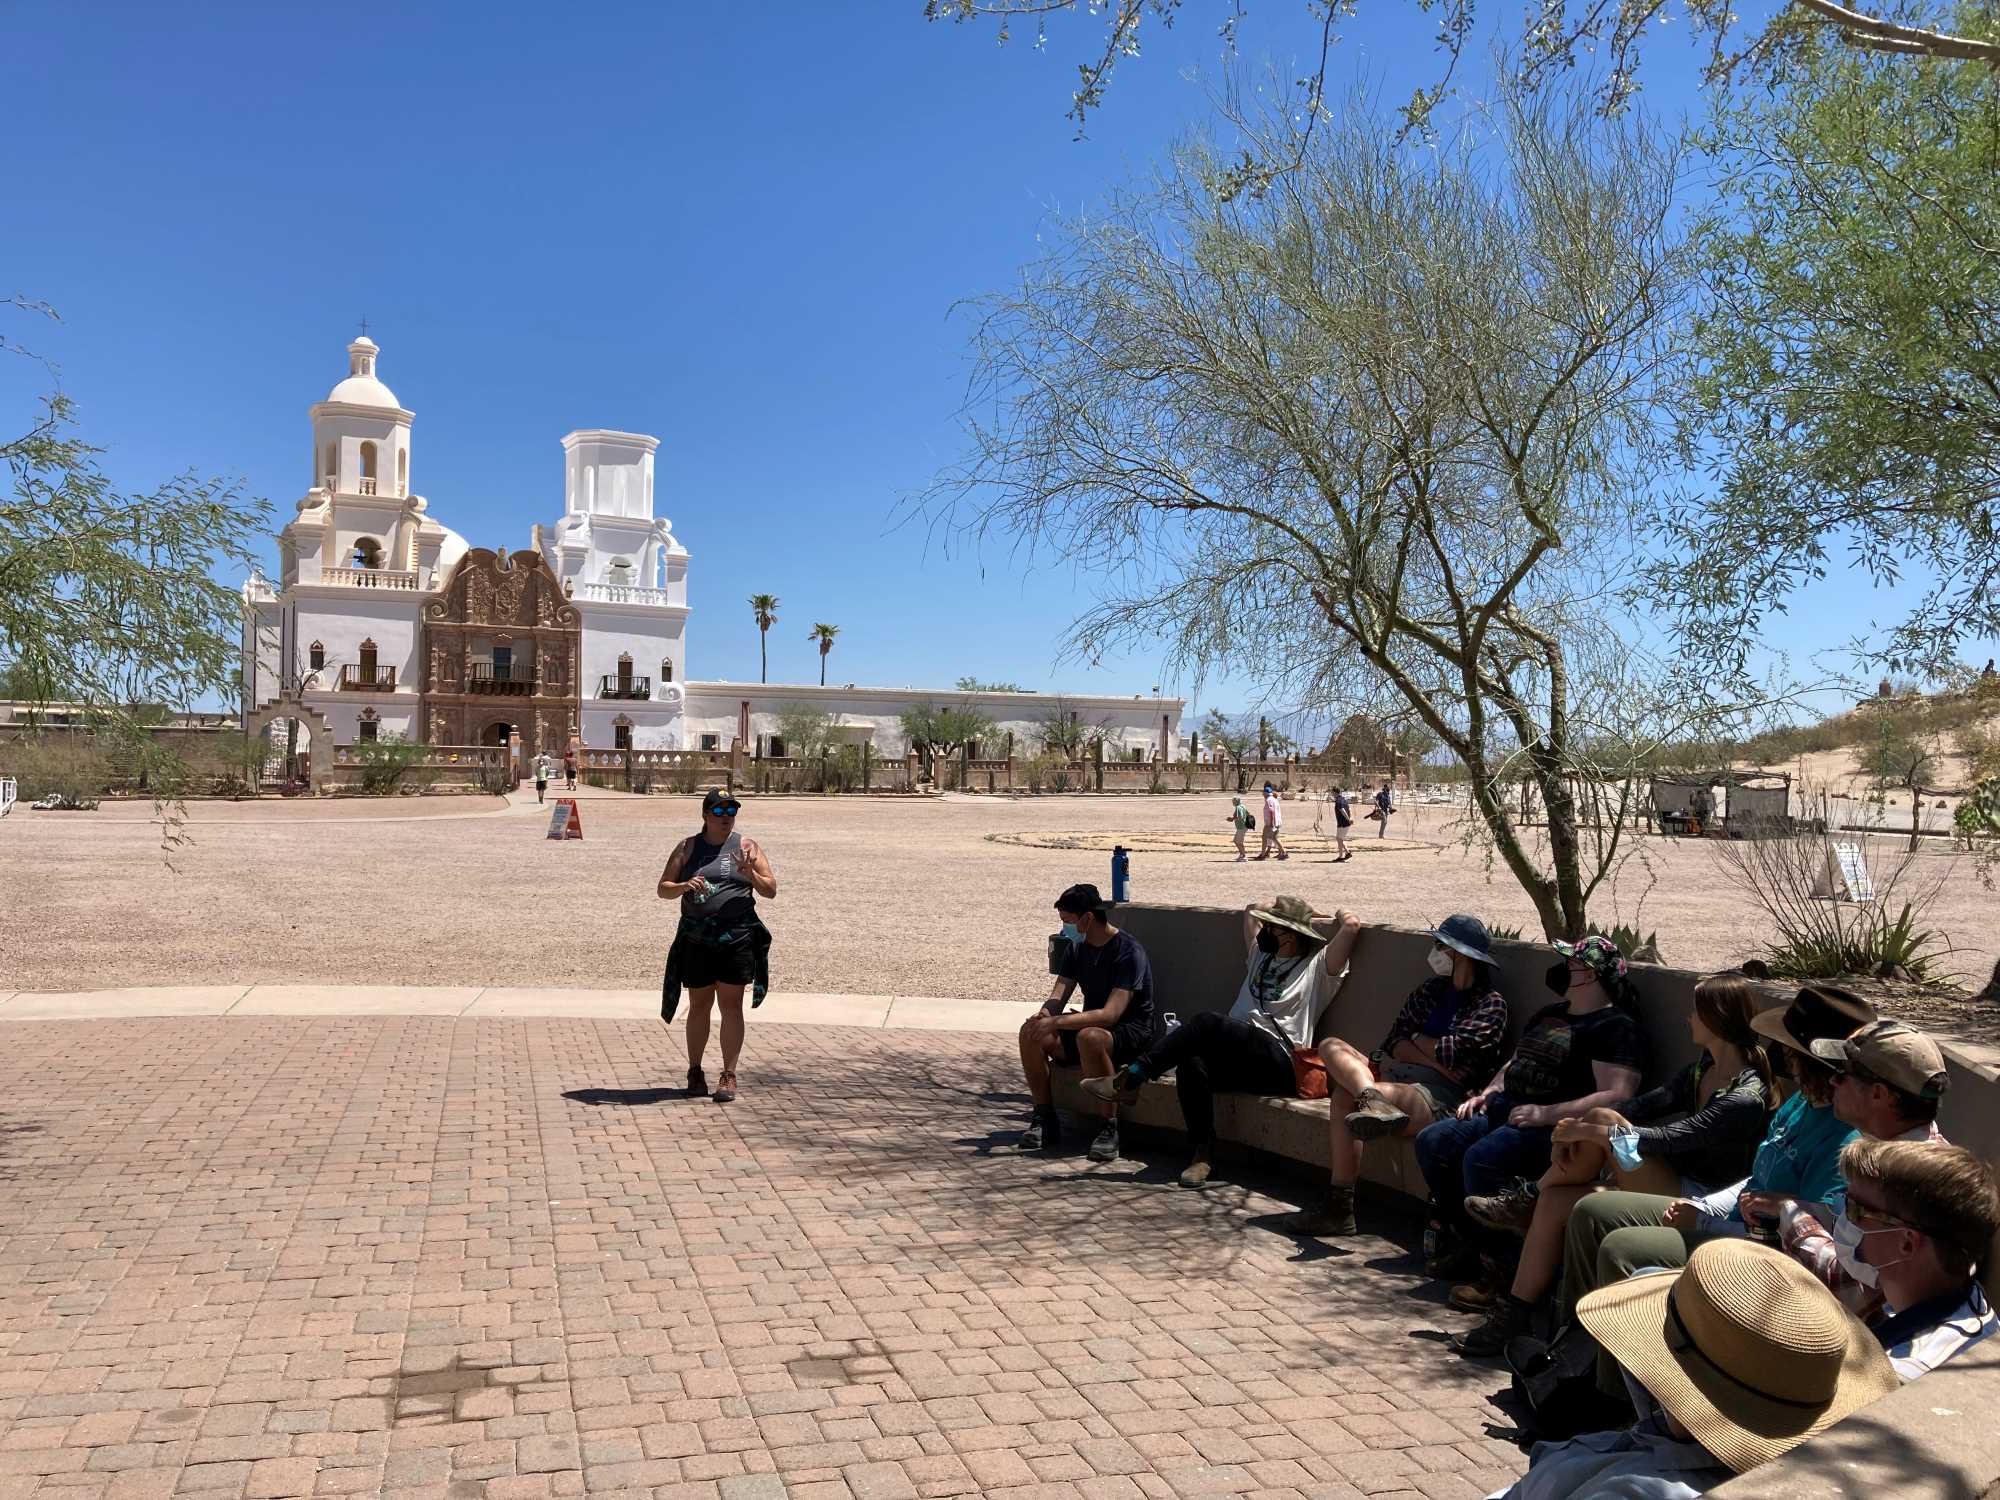 Jacelle Ramon-Sauberan (Tohono O’odham Community College) introduces our group to the history of San Xavier del Bac, the community where she grew up and continues to work researching the history of land and water use.